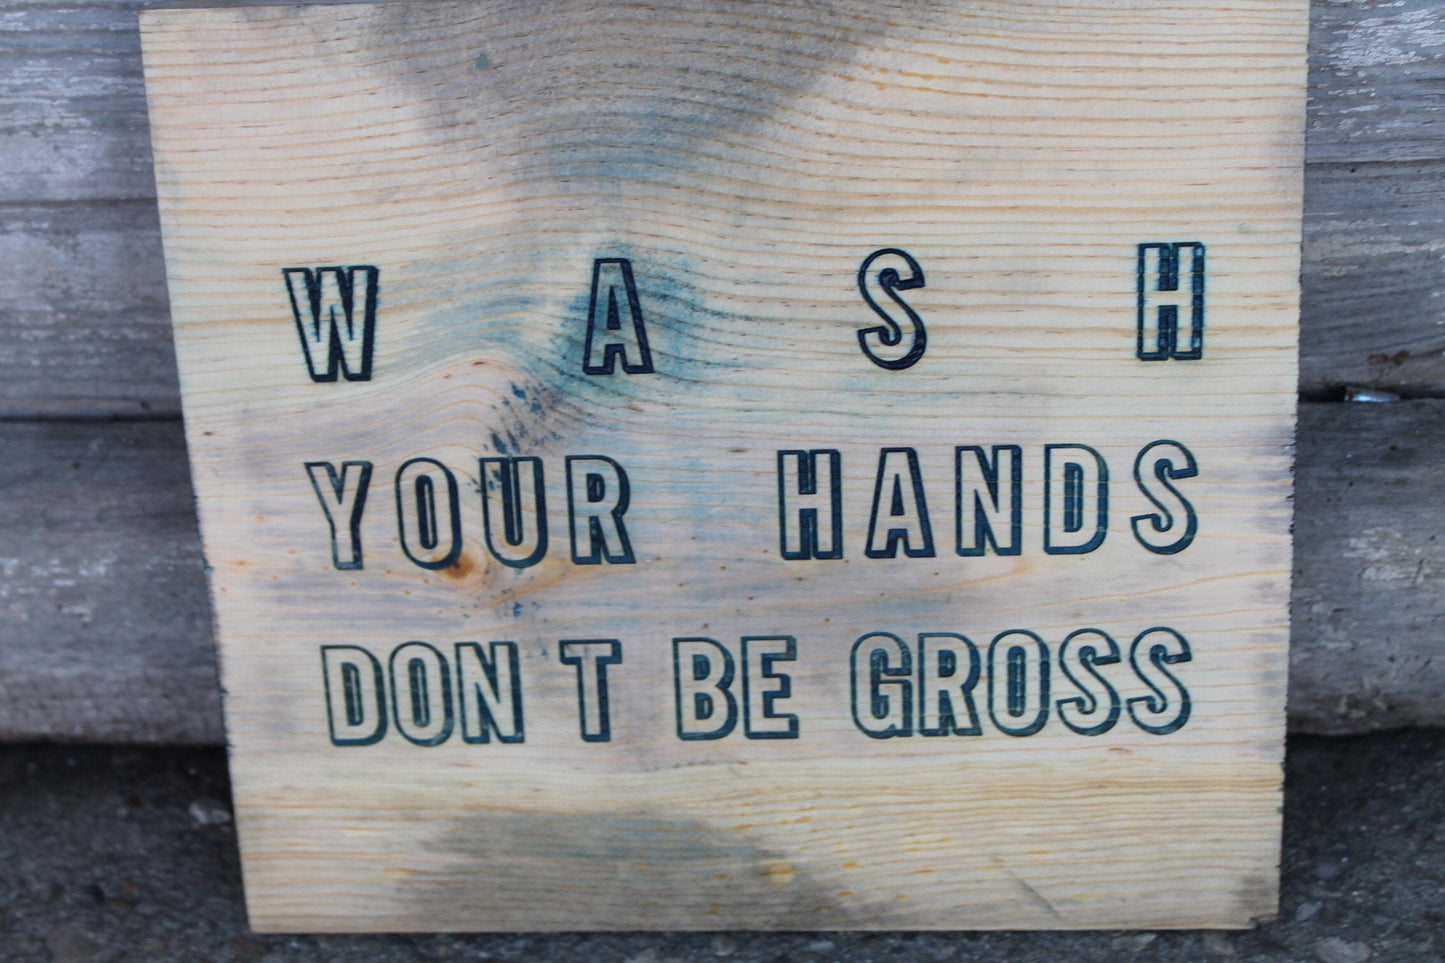 Funny, Bathroom, Sign, Wash Your Hands, Don't be Gross, Humor, Engraved, Rustic, Wood, Gross, Joke, Silly, Guest Bath, Decor, Clean